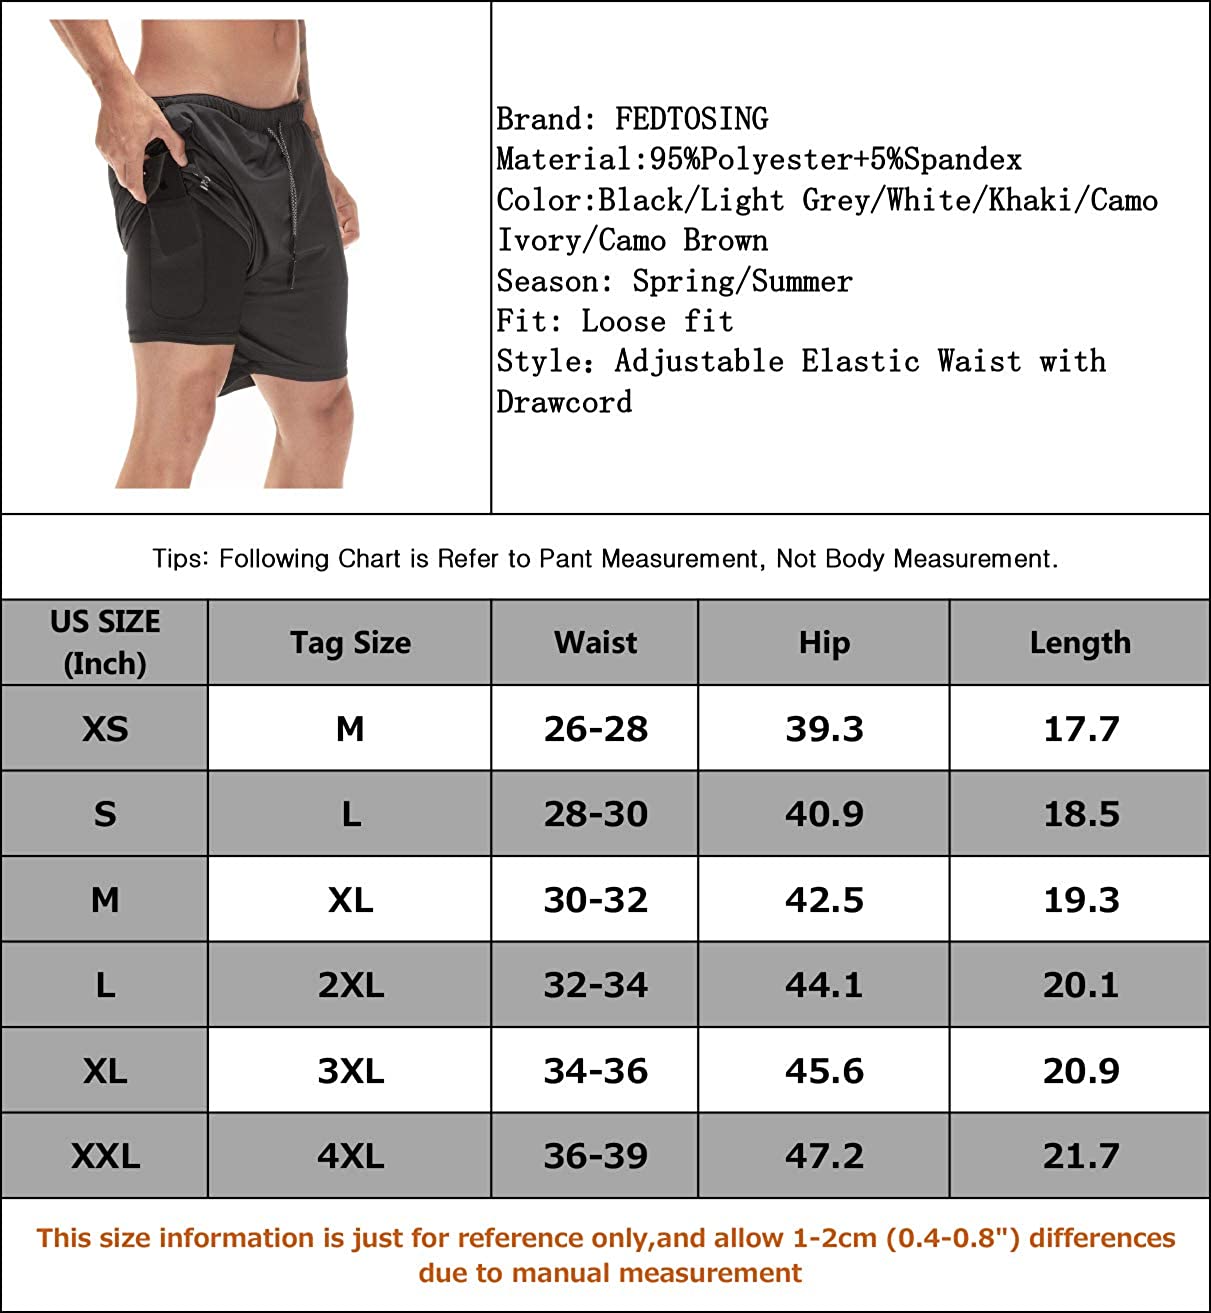 FEDTOSING Men's 2 in 1 Workout Running Shorts Athletic, White, Size XX ...